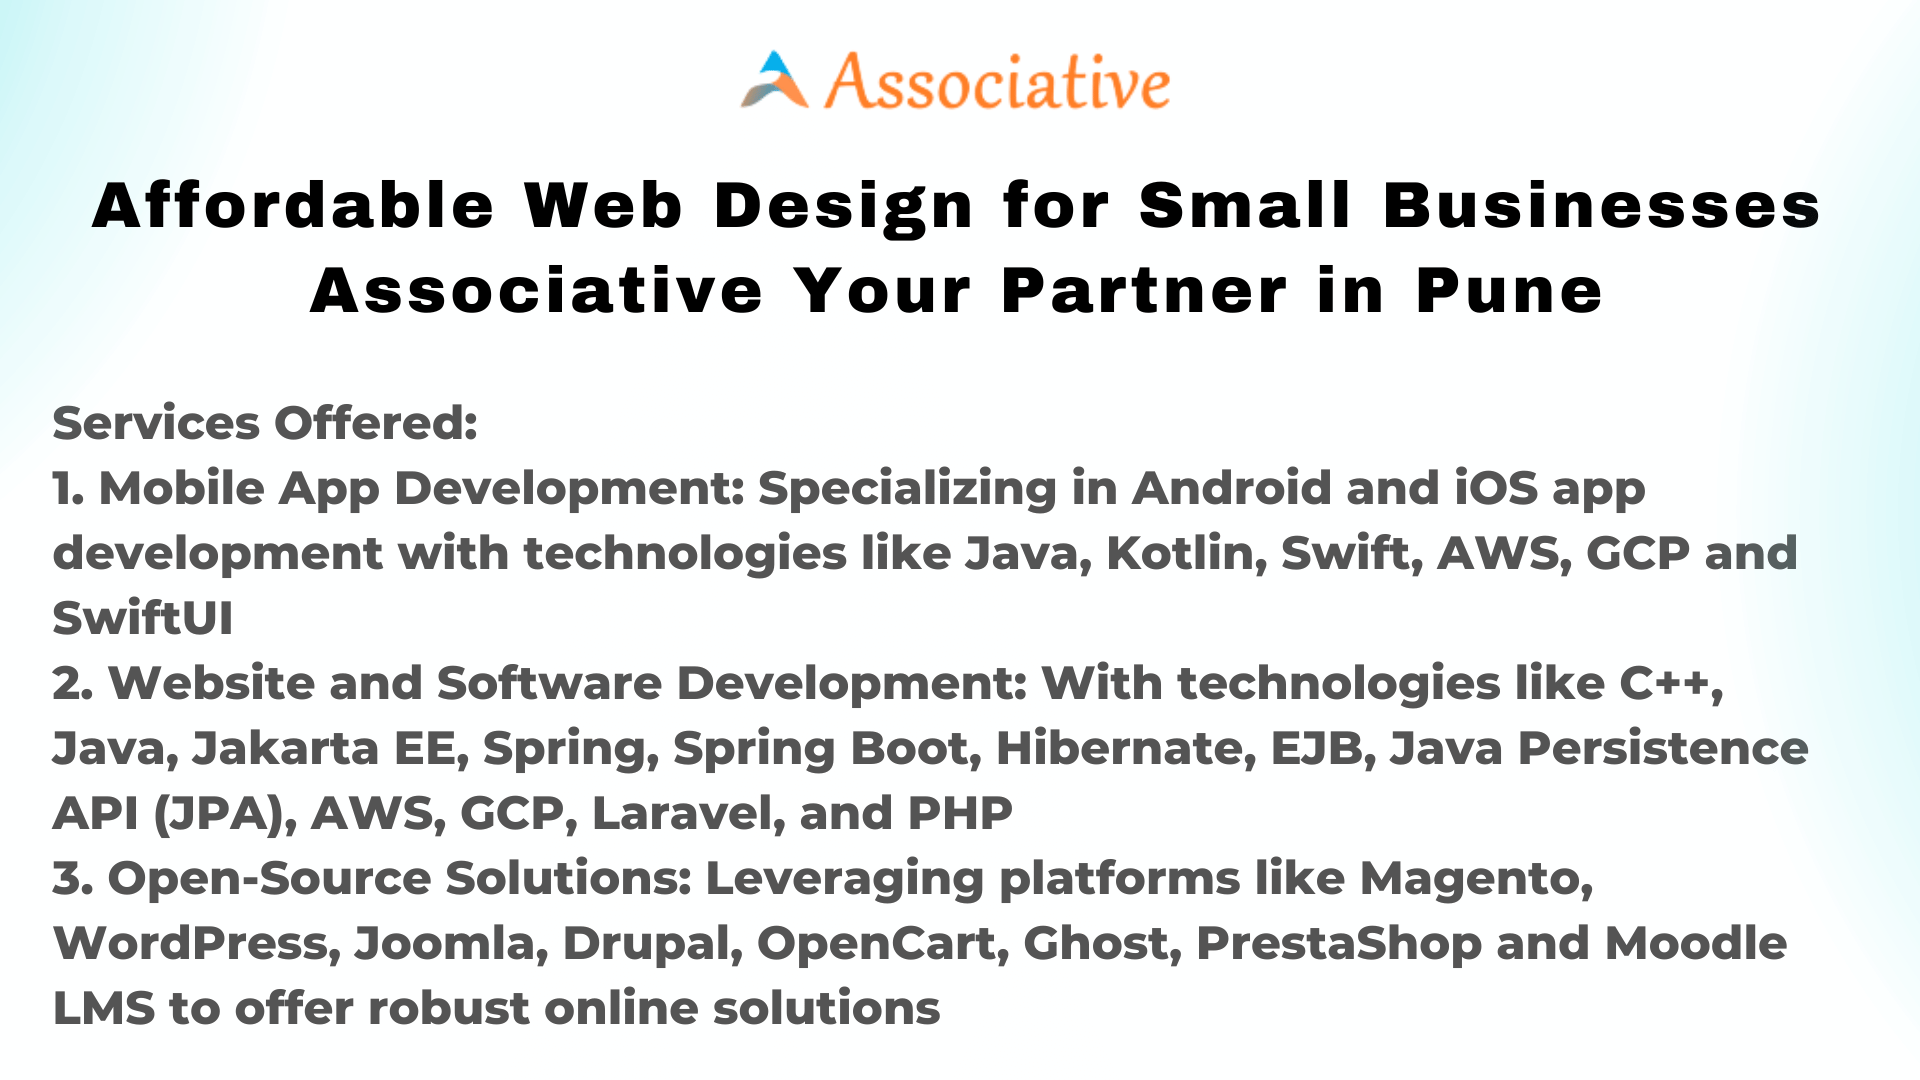 Affordable Web Design for Small Businesses Associative Your Partner in Pune